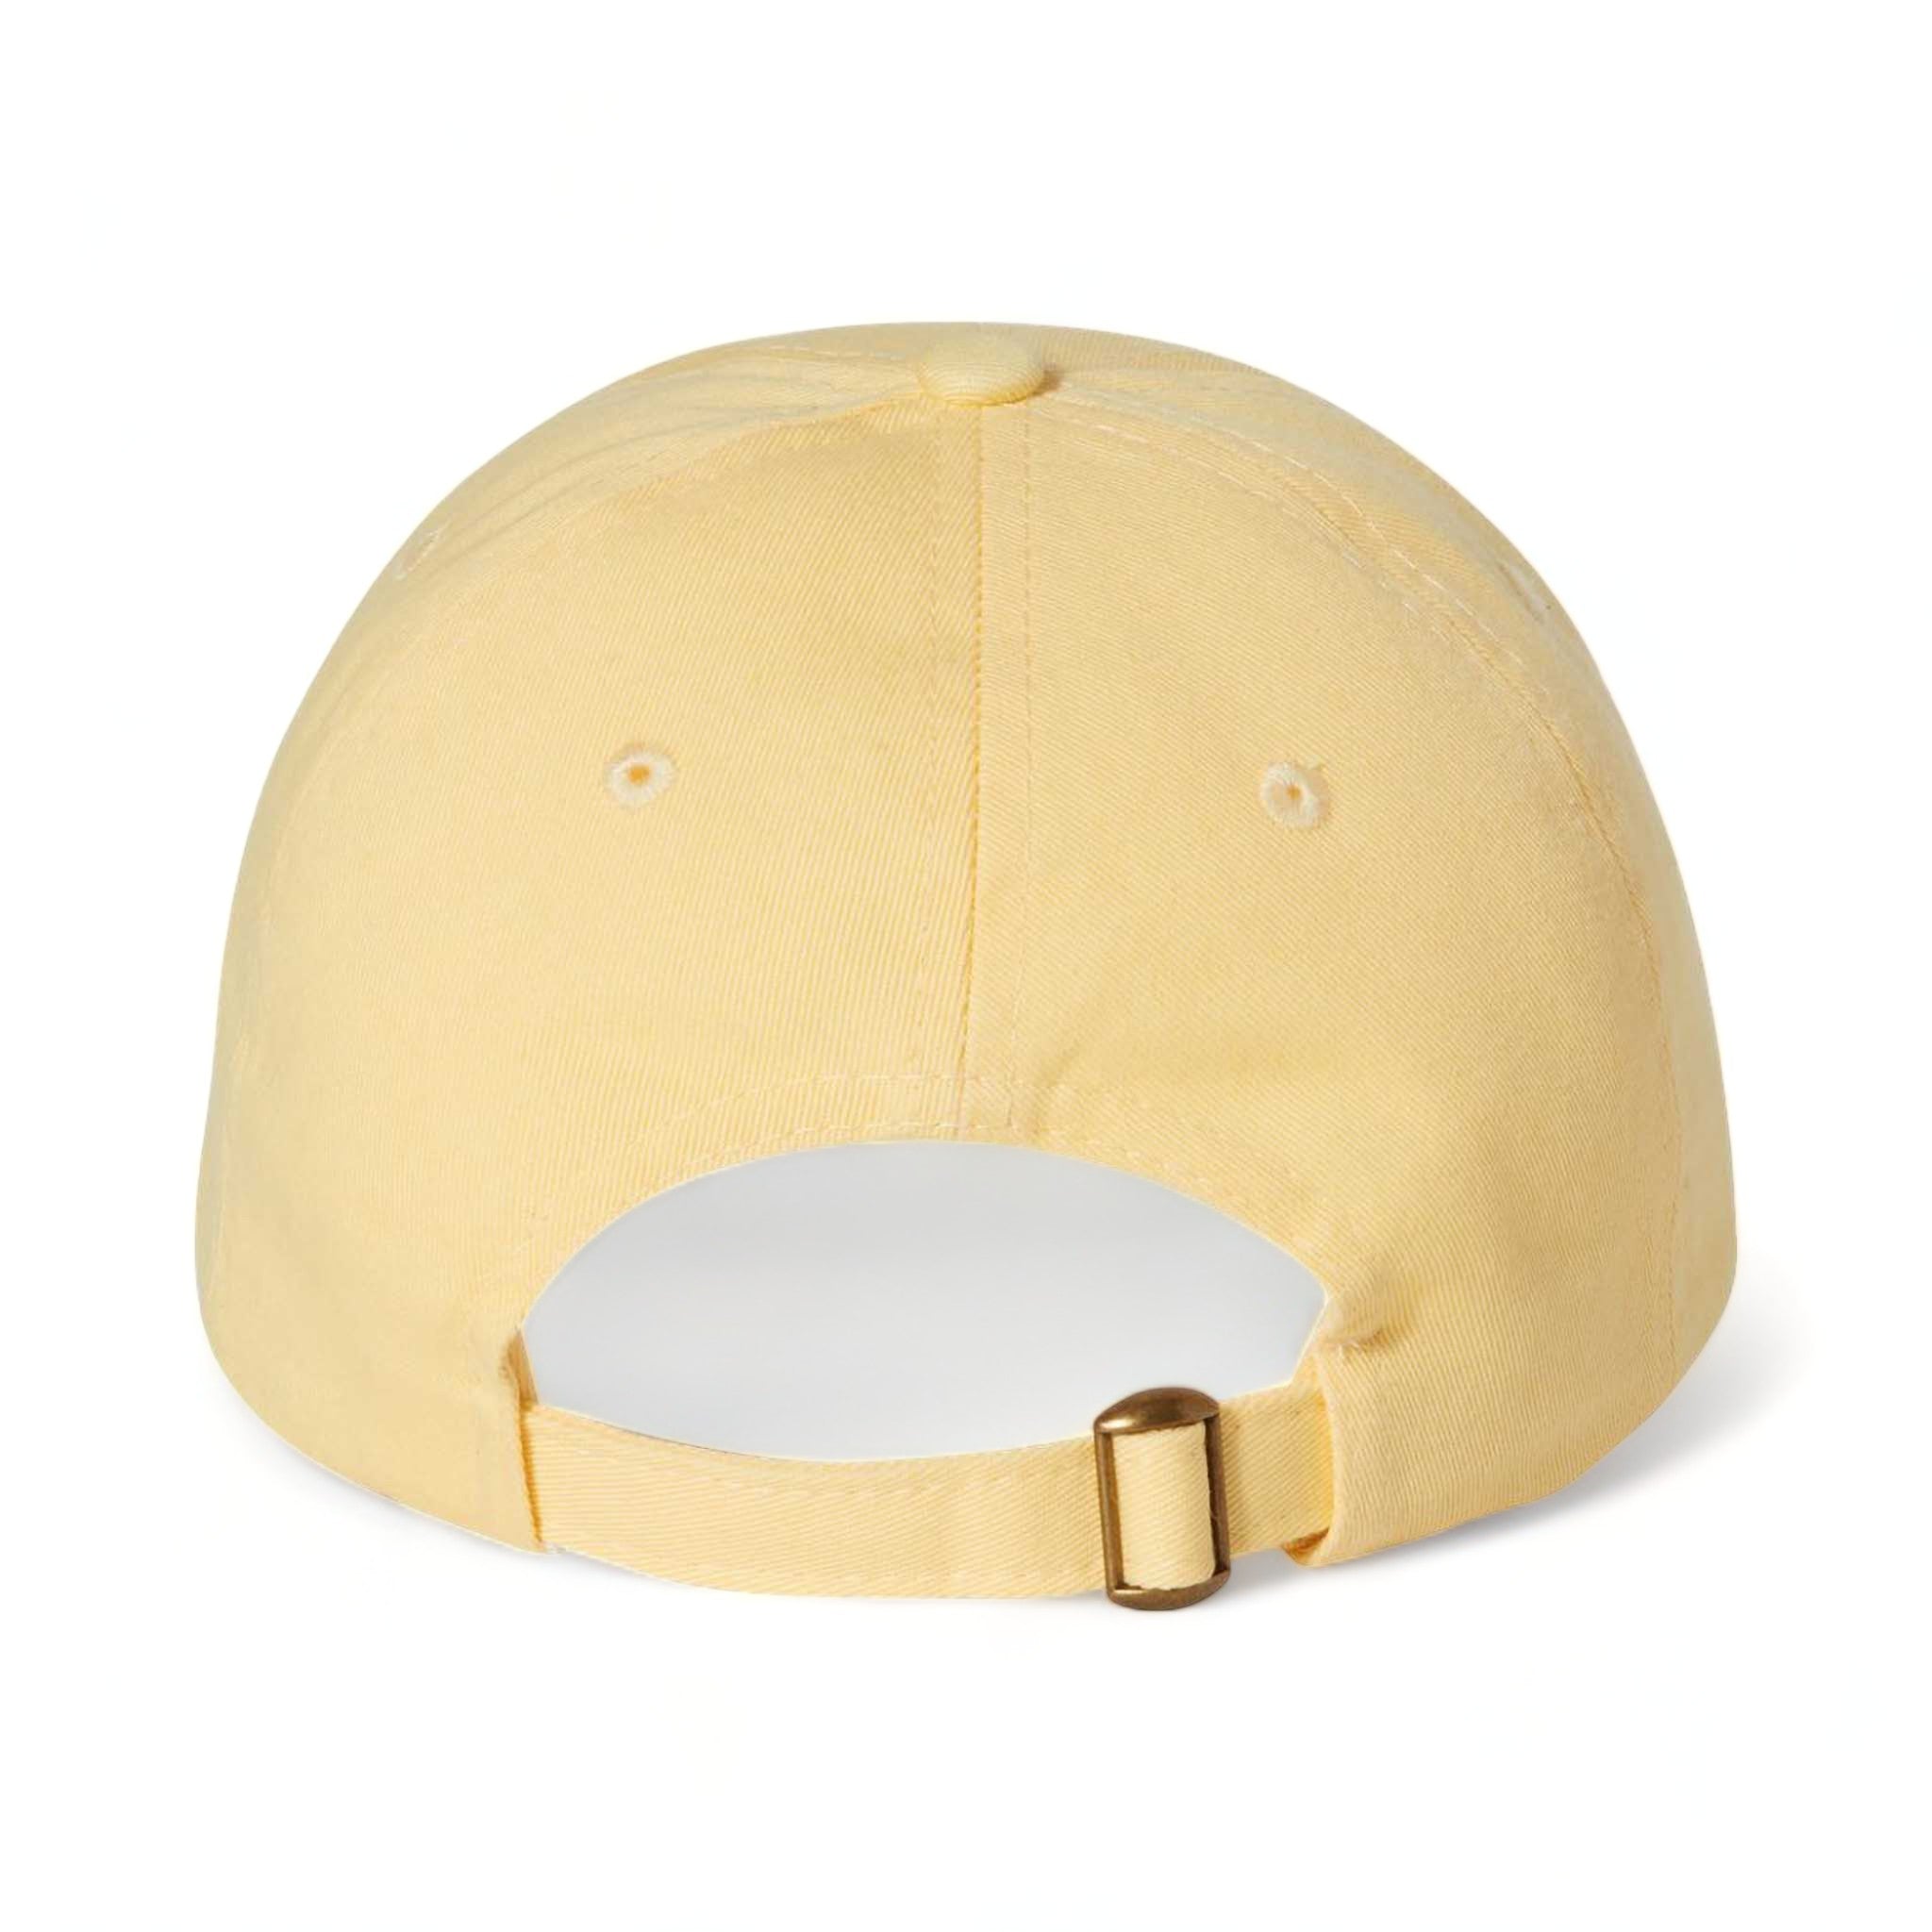 Back view of Valucap VC300A custom hat in butter